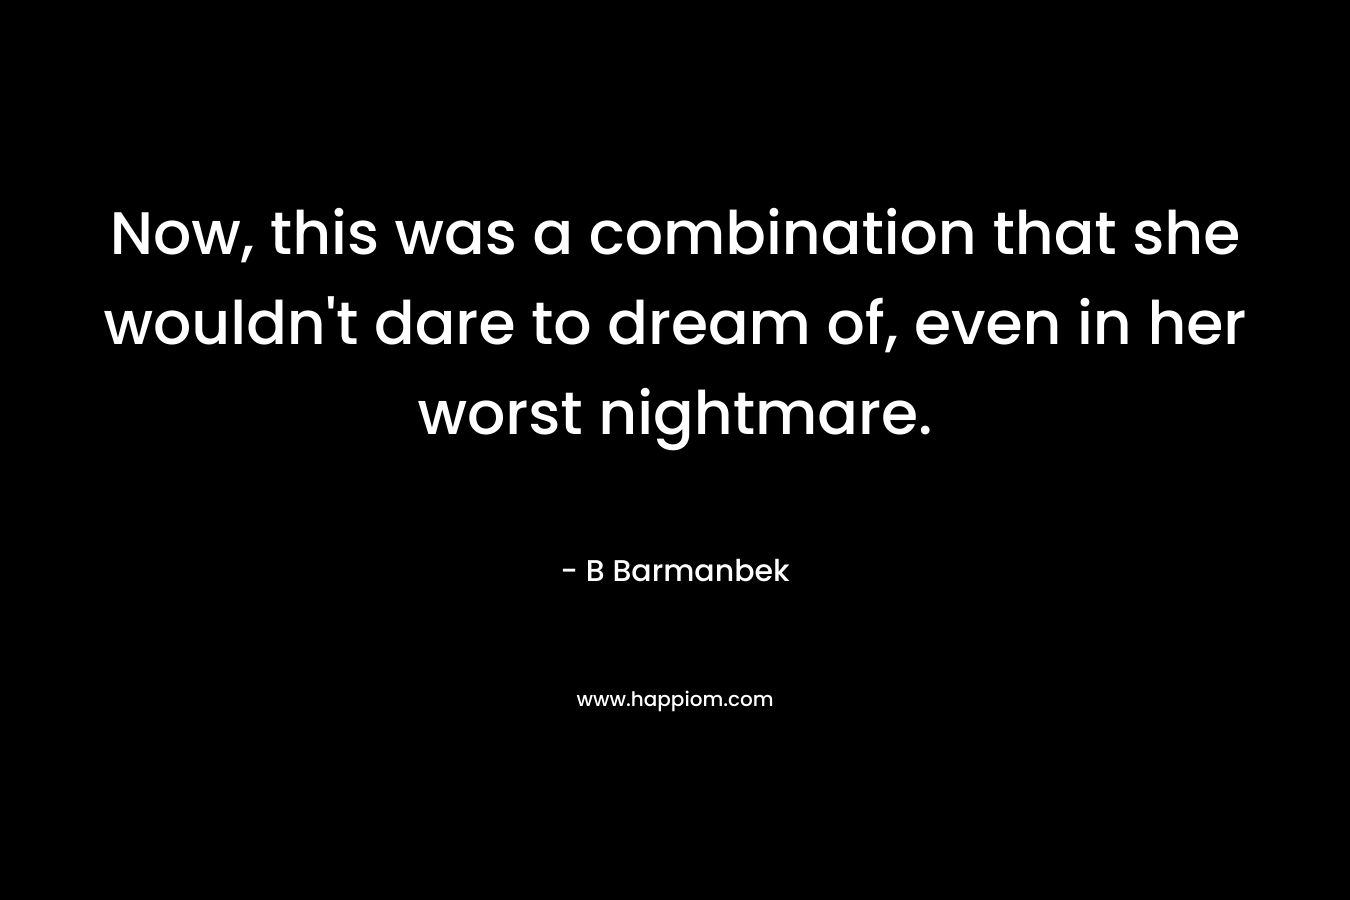 Now, this was a combination that she wouldn’t dare to dream of, even in her worst nightmare. – B Barmanbek